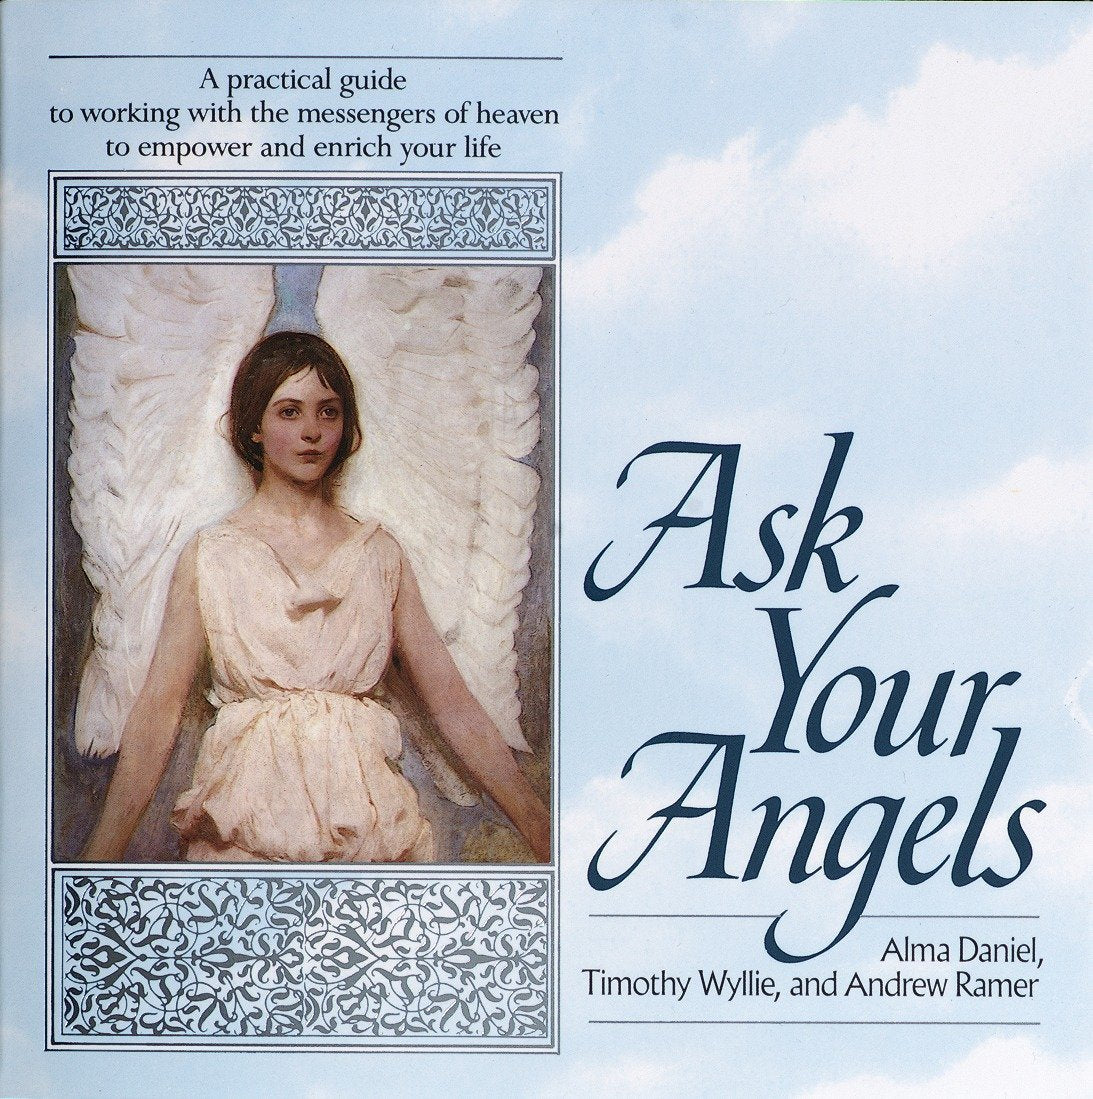 Ask Your Angels: A Practical Guide to Working with the Messengers of Heaven to Empower and Enrich Your Lifes || Alma Daniel Timothy Wyllie & Andrew Ramer (Paperback)